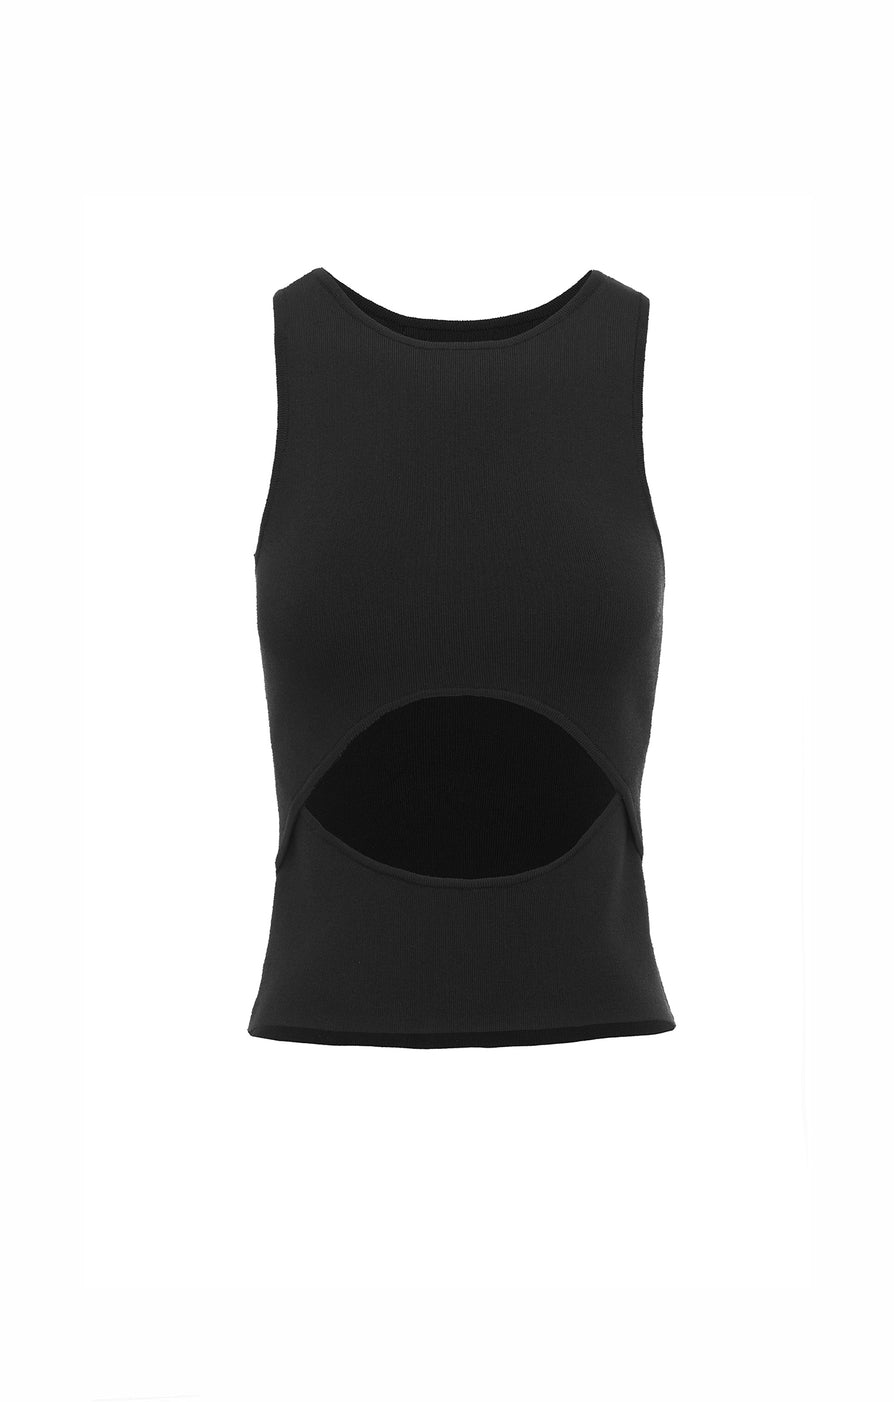 THE CLEO TOP BLACK | ghost